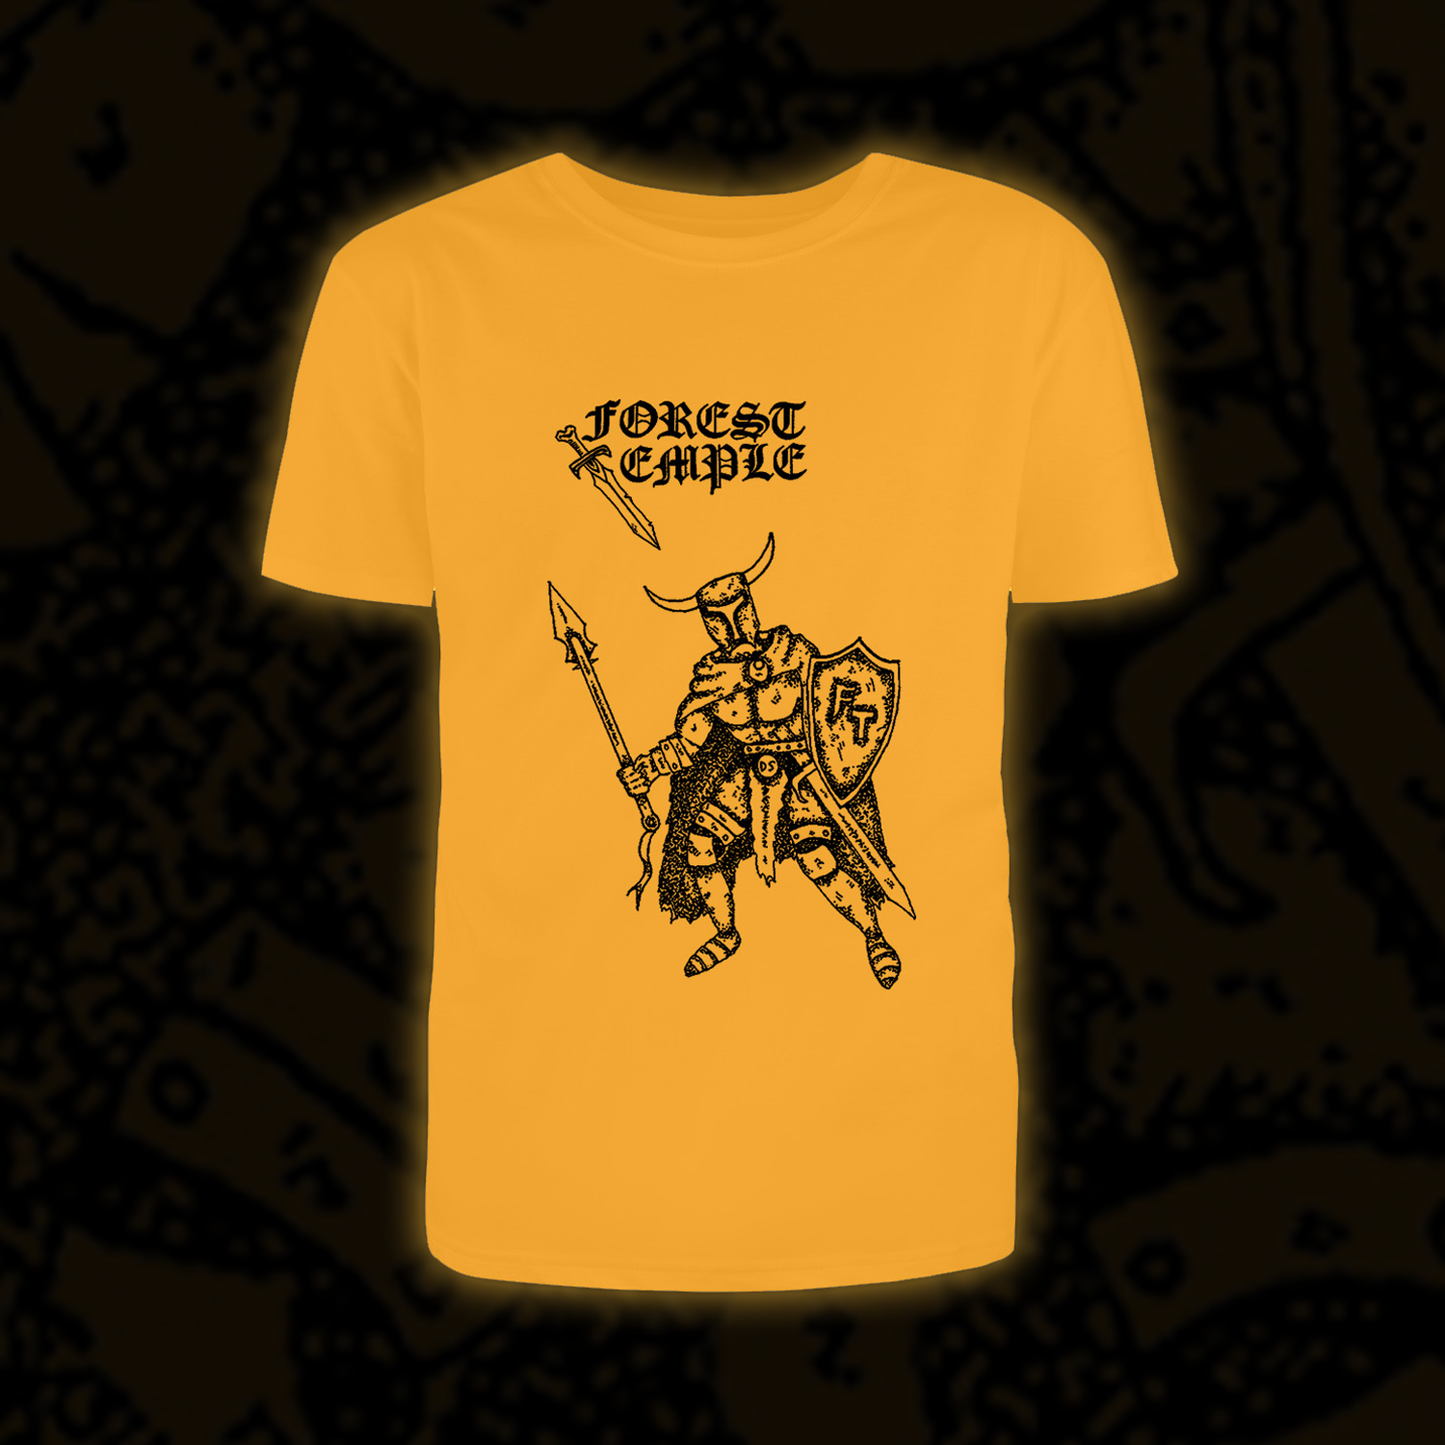 [SOLD OUT] FOREST TEMPLE "Fantasy and Fable" T-Shirt [GOLD]